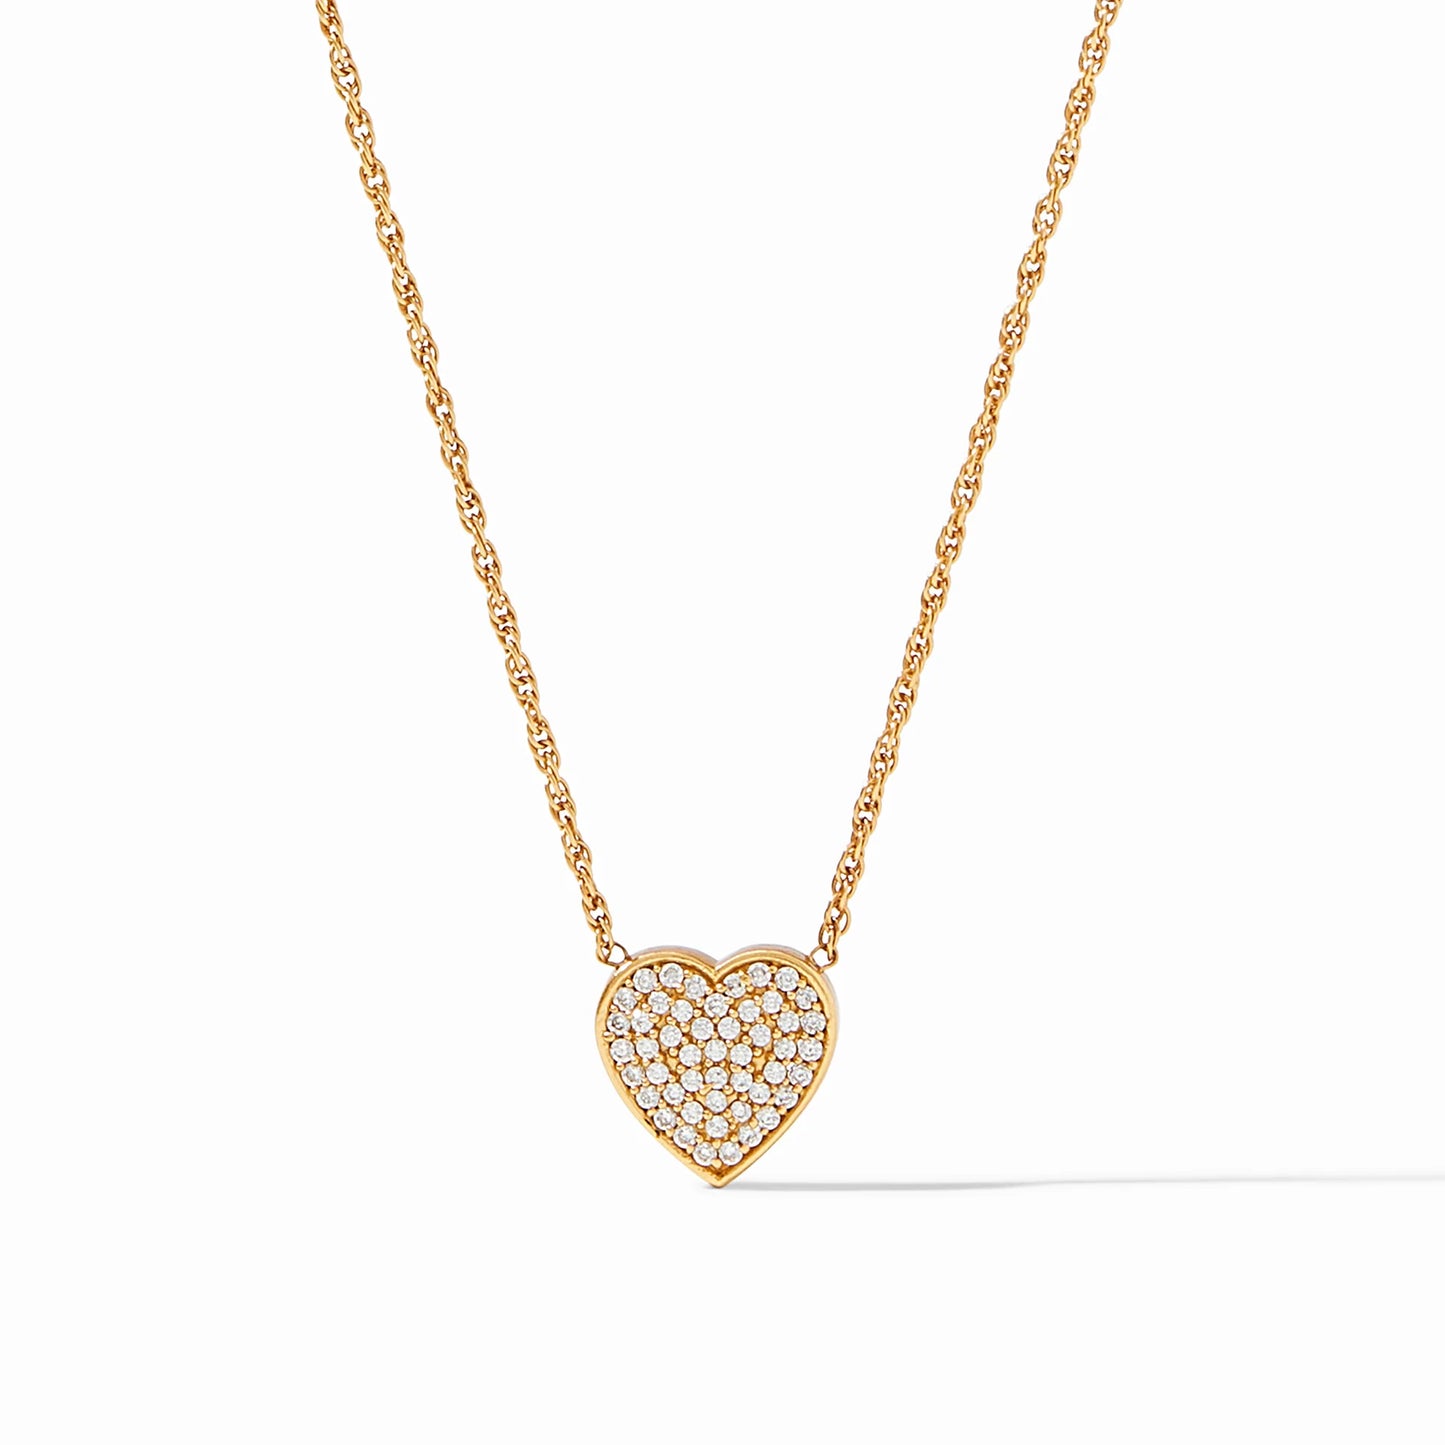 Julie Vos Heart Pave Delicate Necklace-Not in Shopify - CJC-Julie Vos-The Village Shoppe, Women’s Fashion Boutique, Shop Online and In Store - Located in Muscle Shoals, AL.